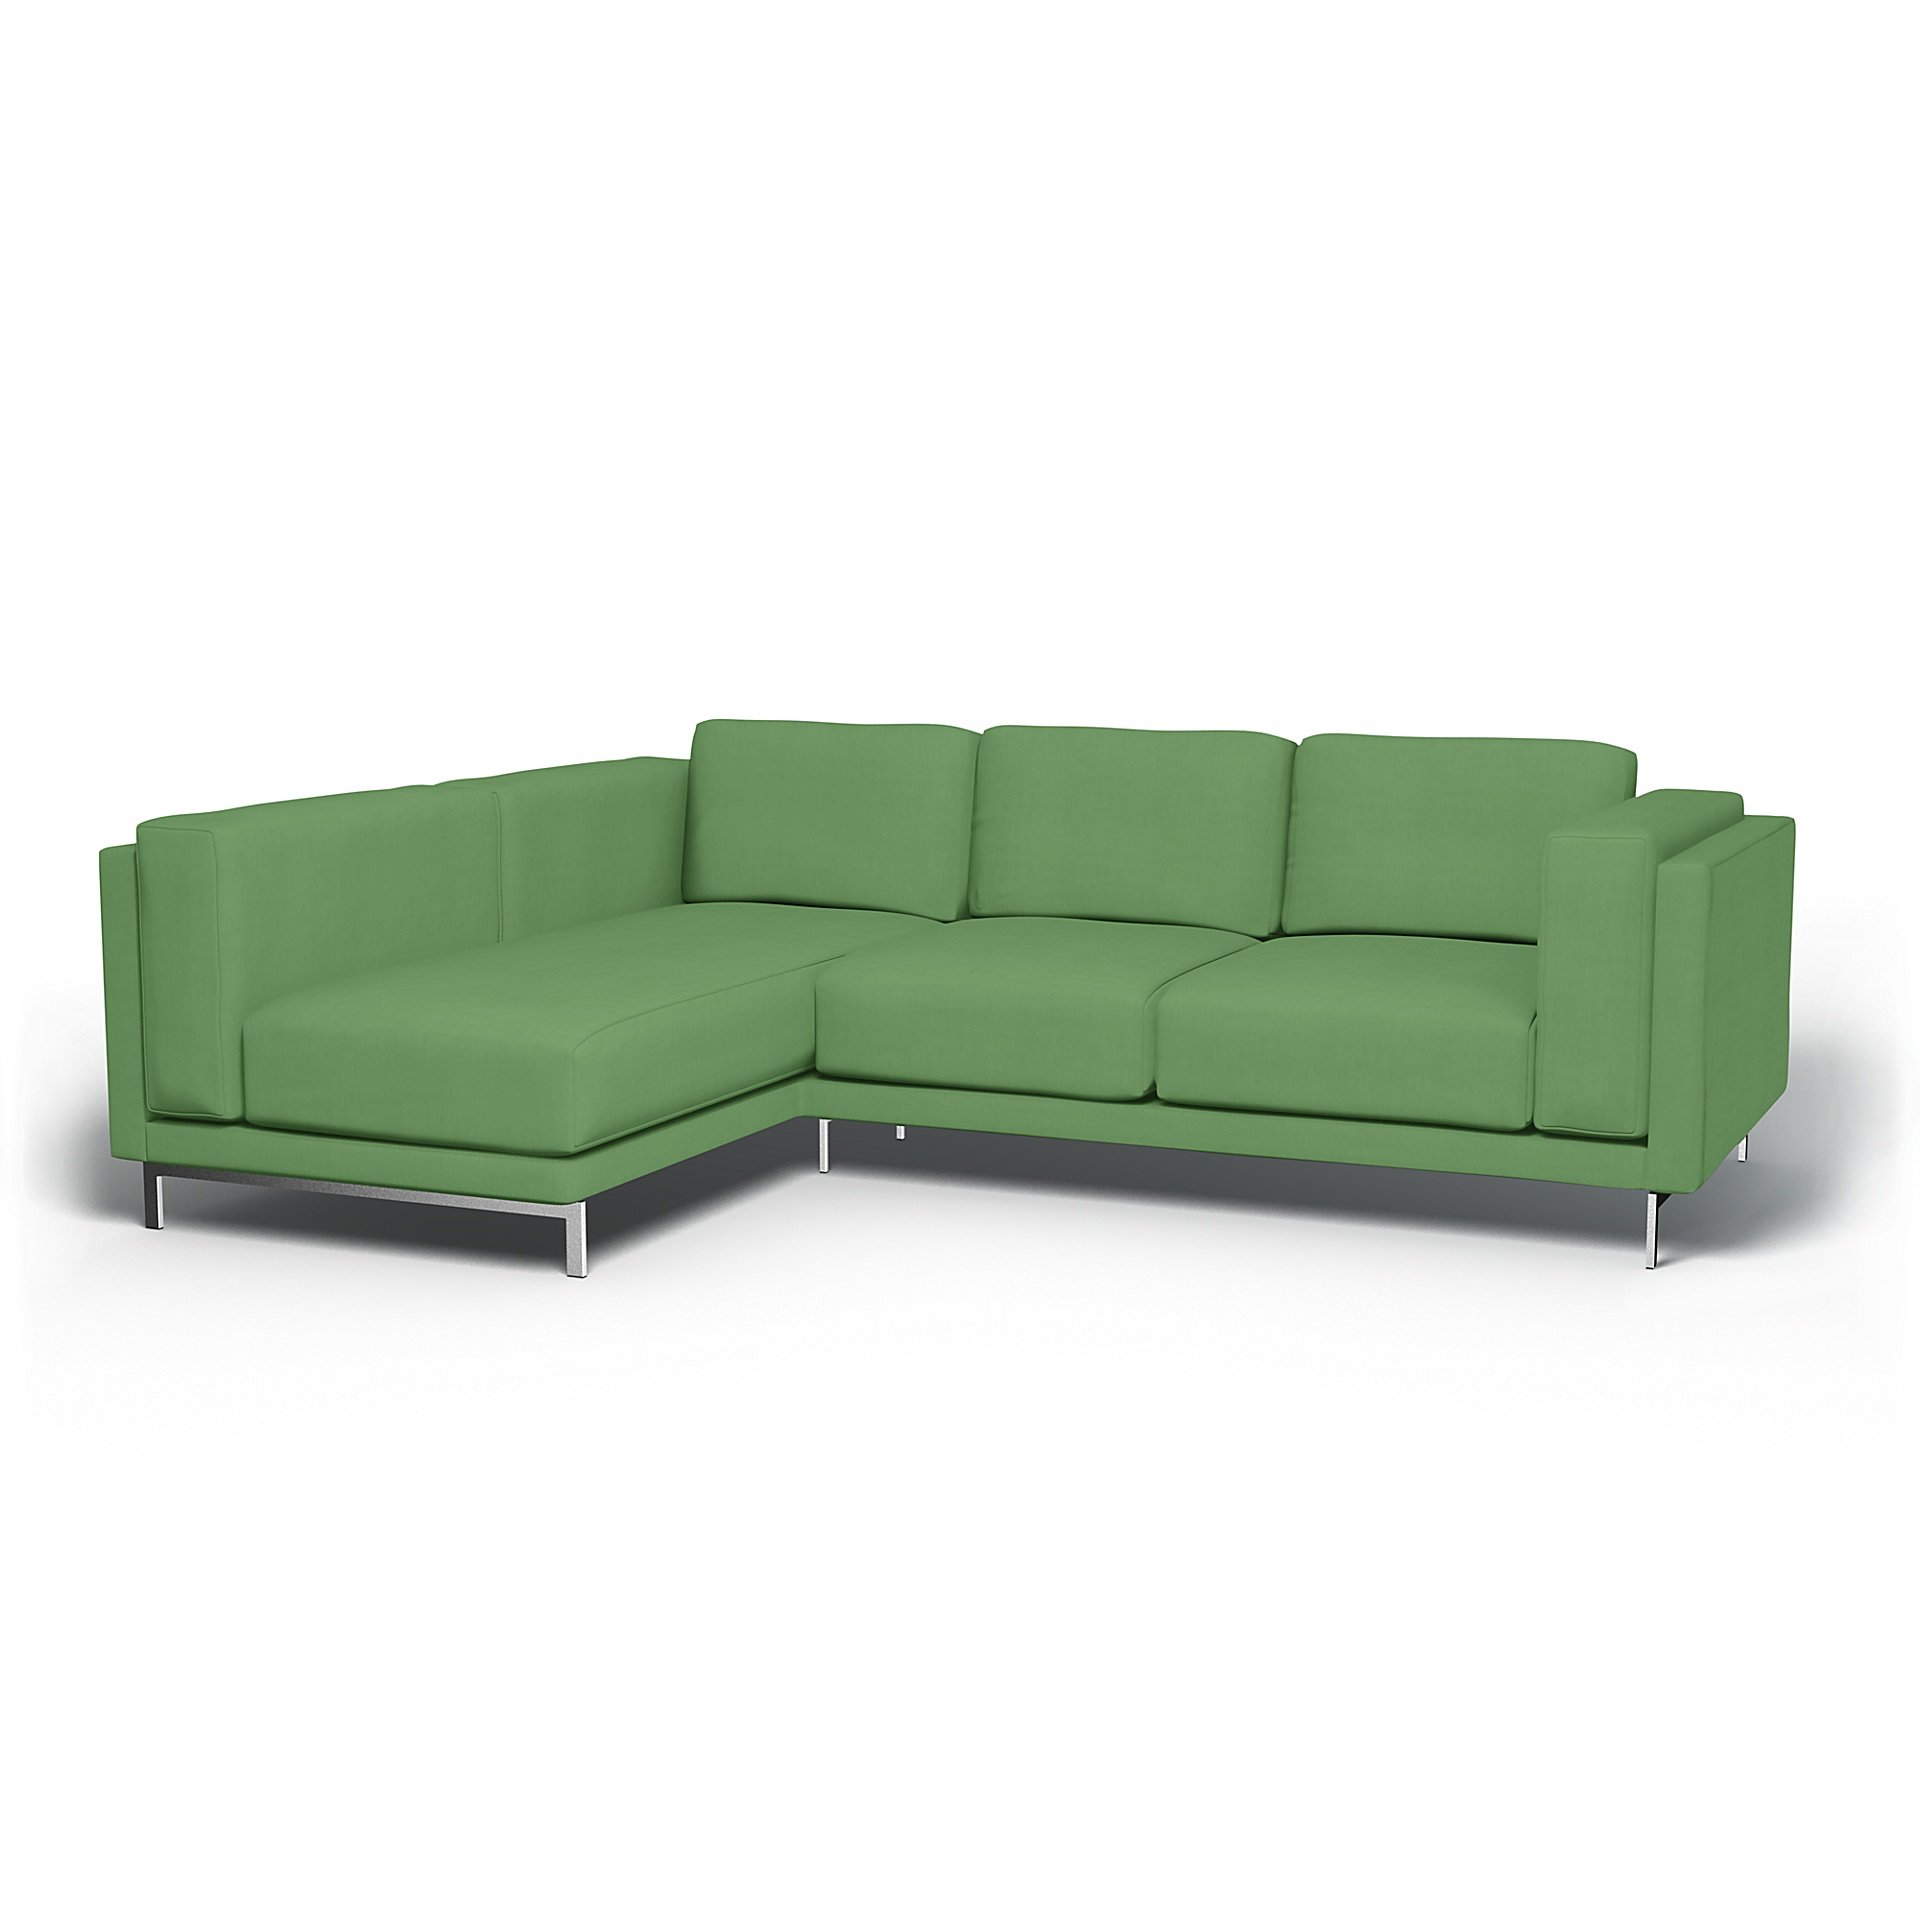 IKEA - Nockeby 3 Seater Sofa with Left Chaise Cover, Apple Green, Linen - Bemz